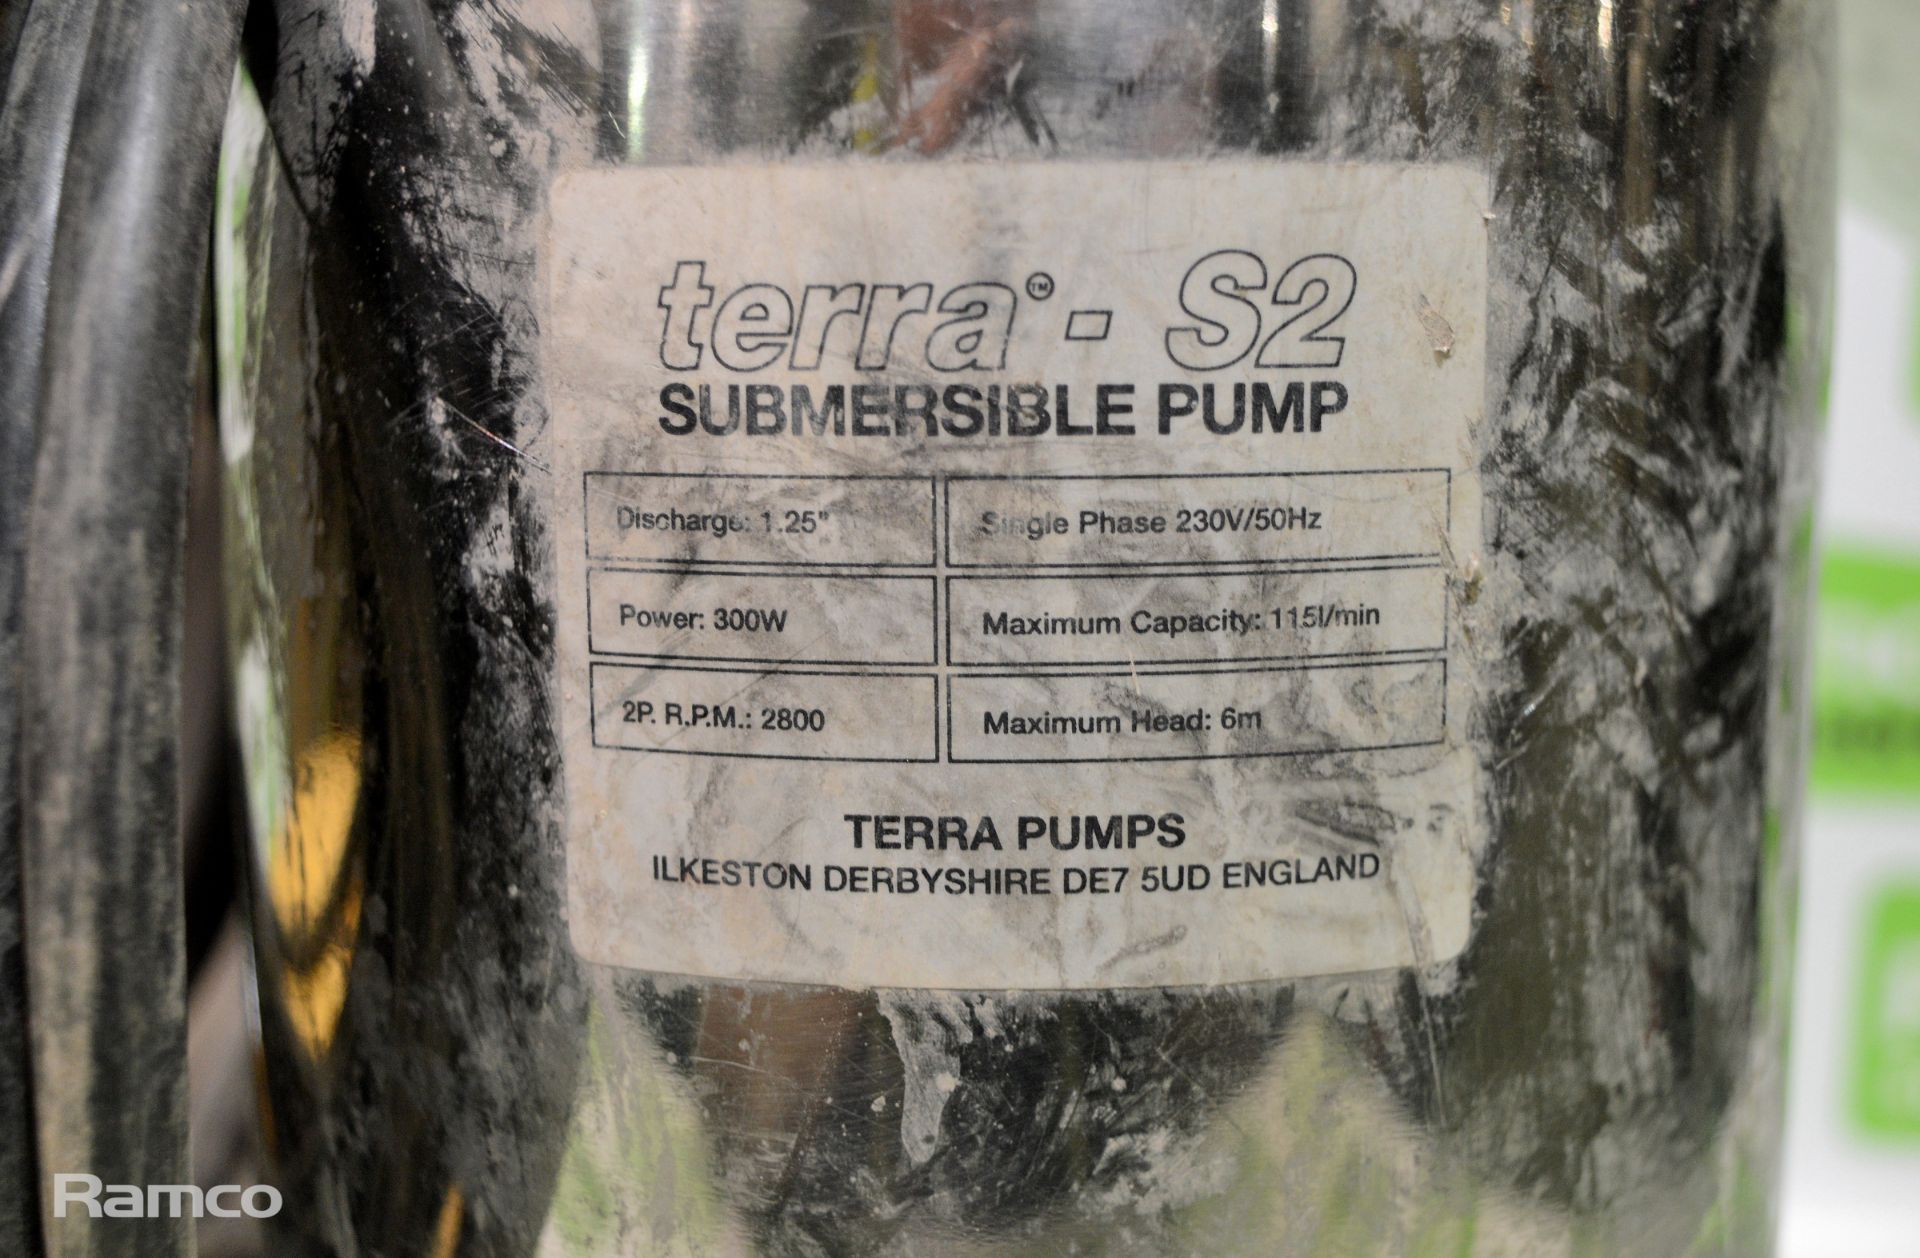 Terra - S2 submersible pump 240v with hose - Image 4 of 5